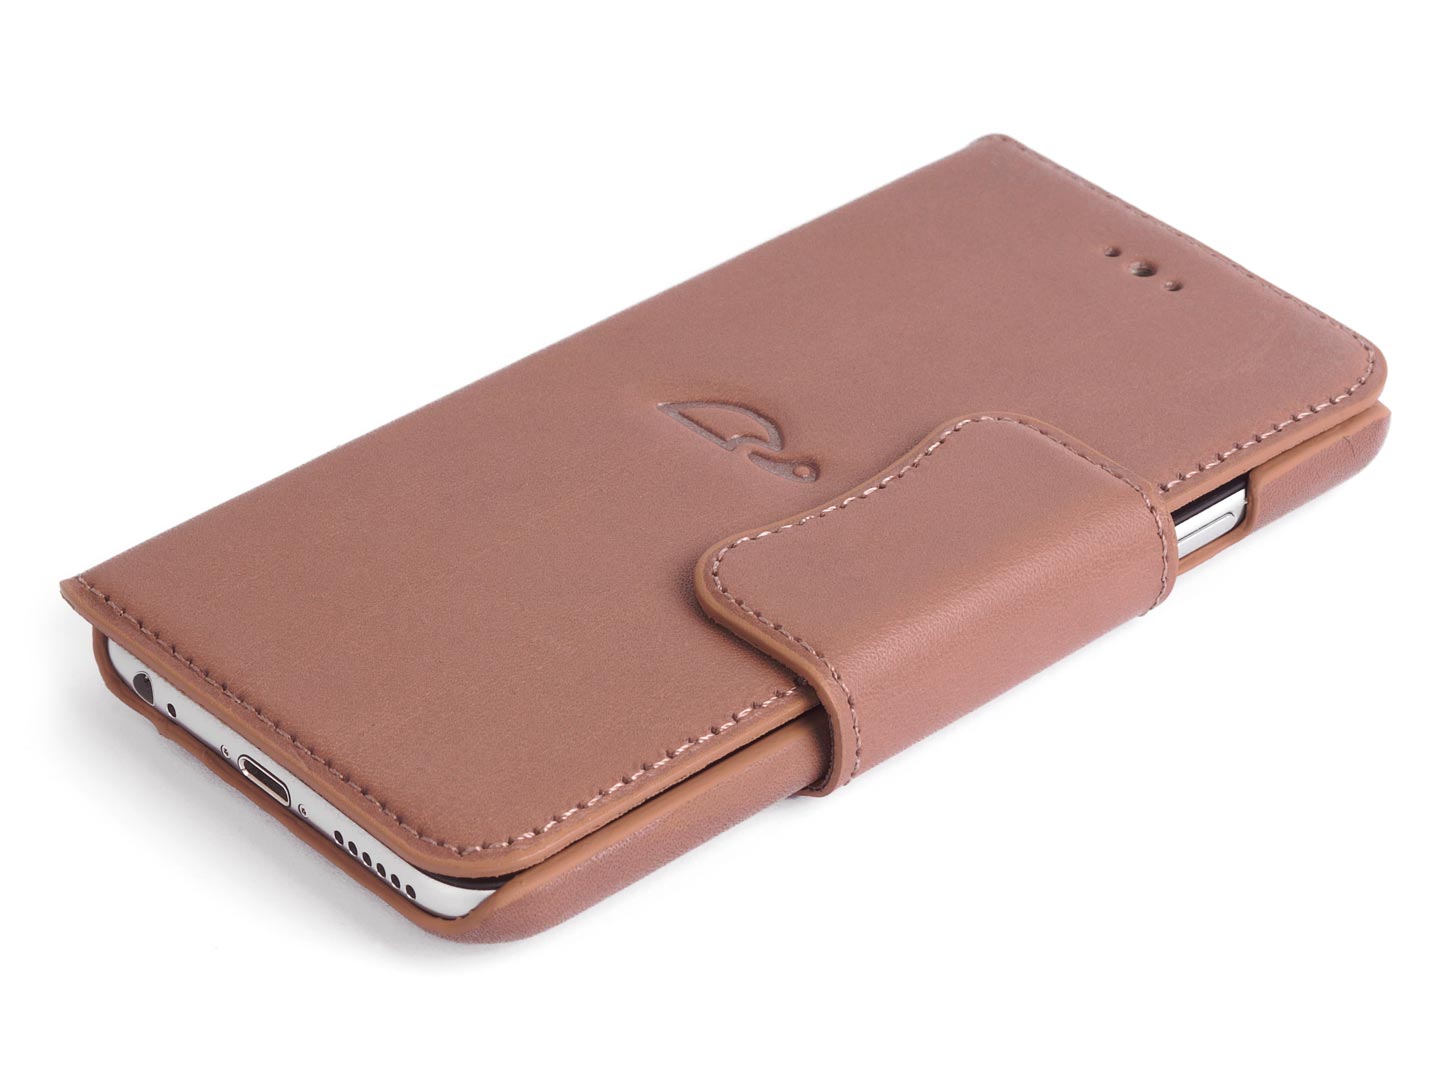 iPhone 6 leather Wallet case - rosy brown - Carapaz